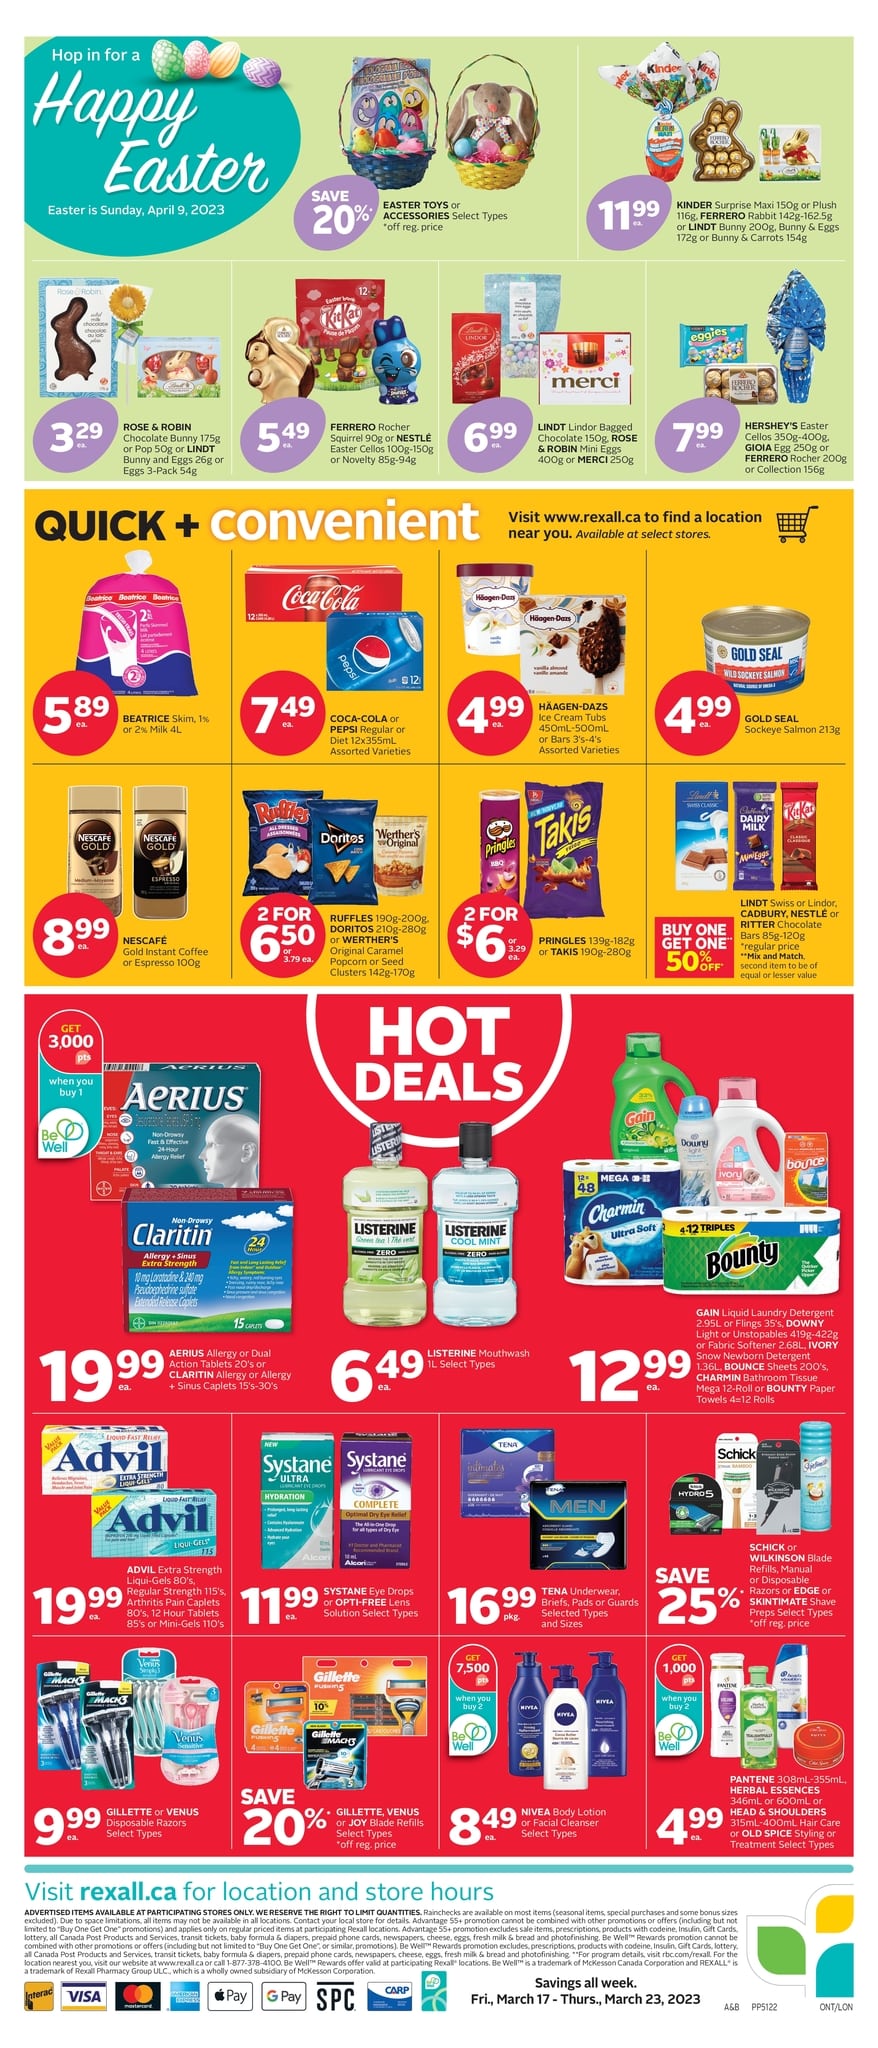 Rexall - Weekly Flyer Specials - Page 2